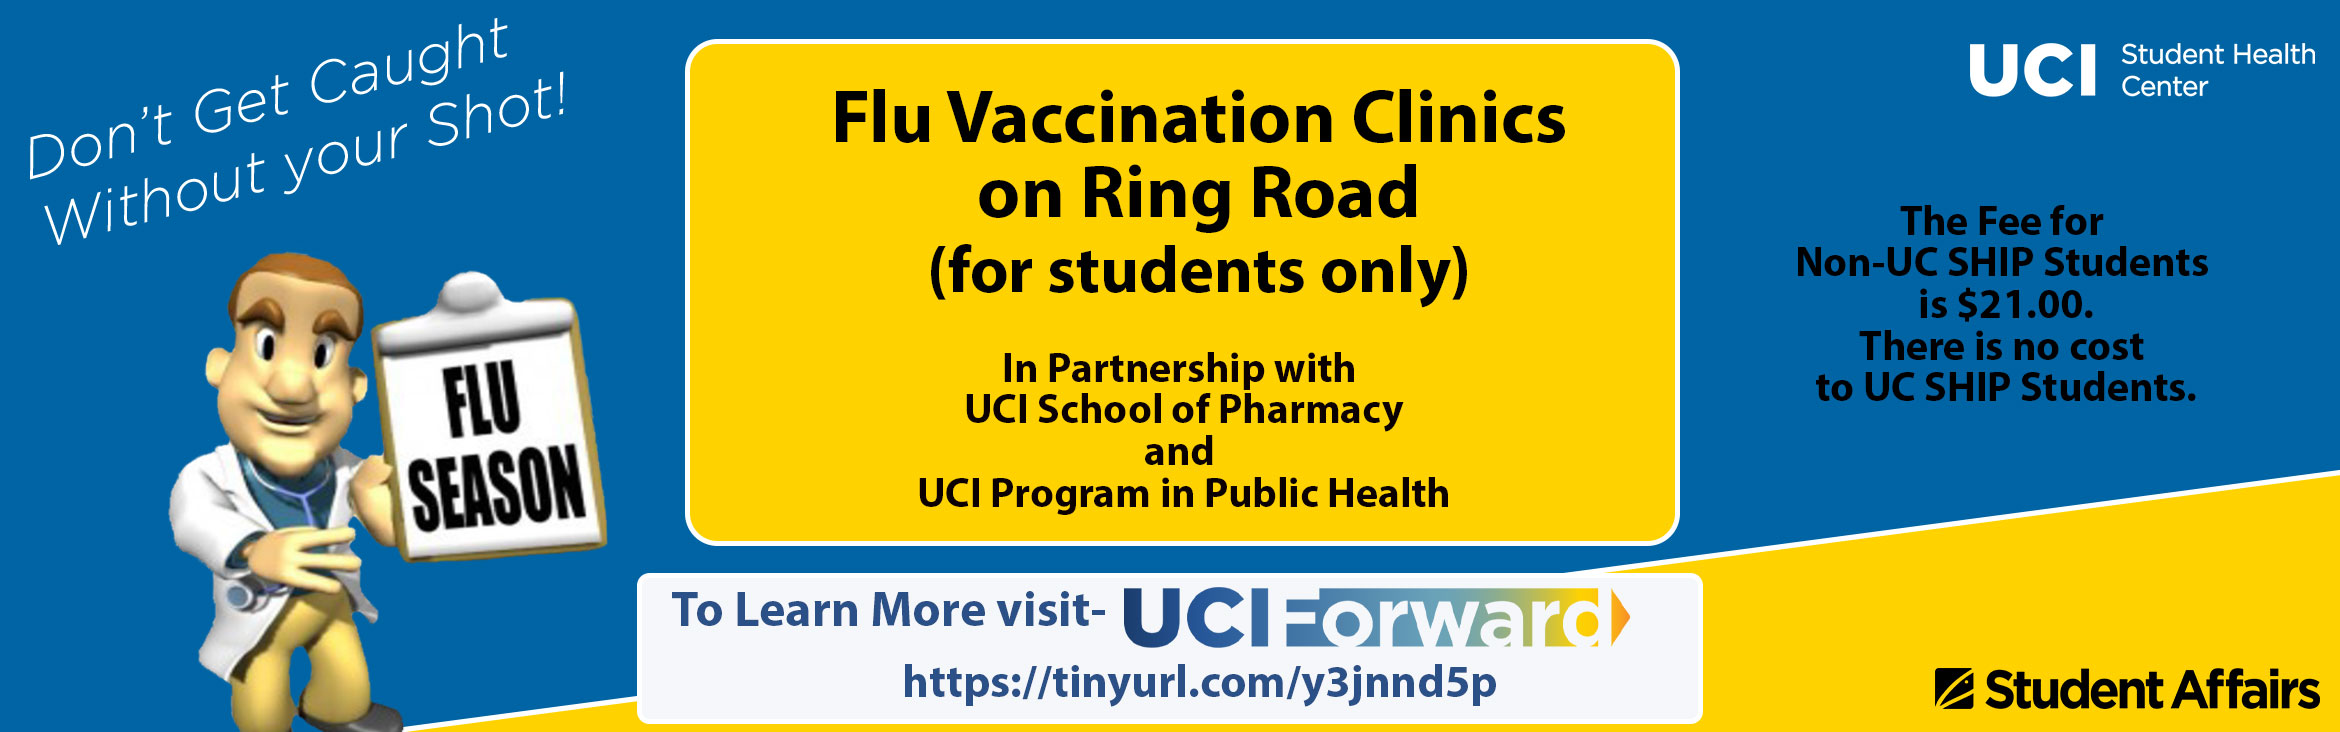 Flu Vaccination Clinics on Ring Road. In Partnership with the UCI School of Pharmacy and UCI Program in Public Health.